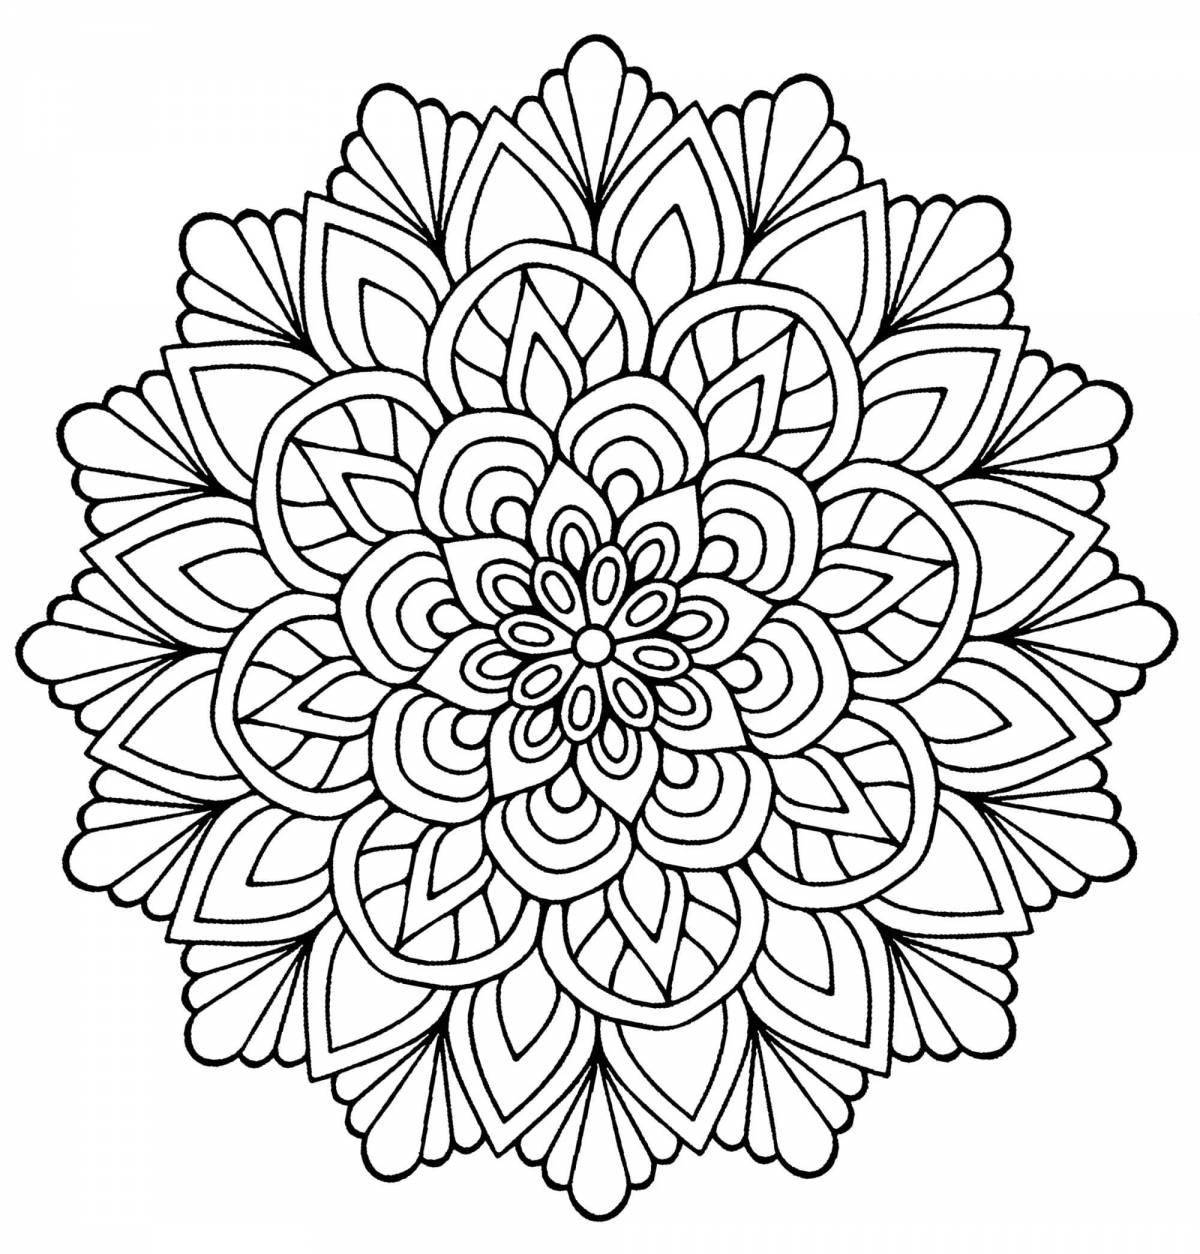 Shining coloring book for all adult mandalas